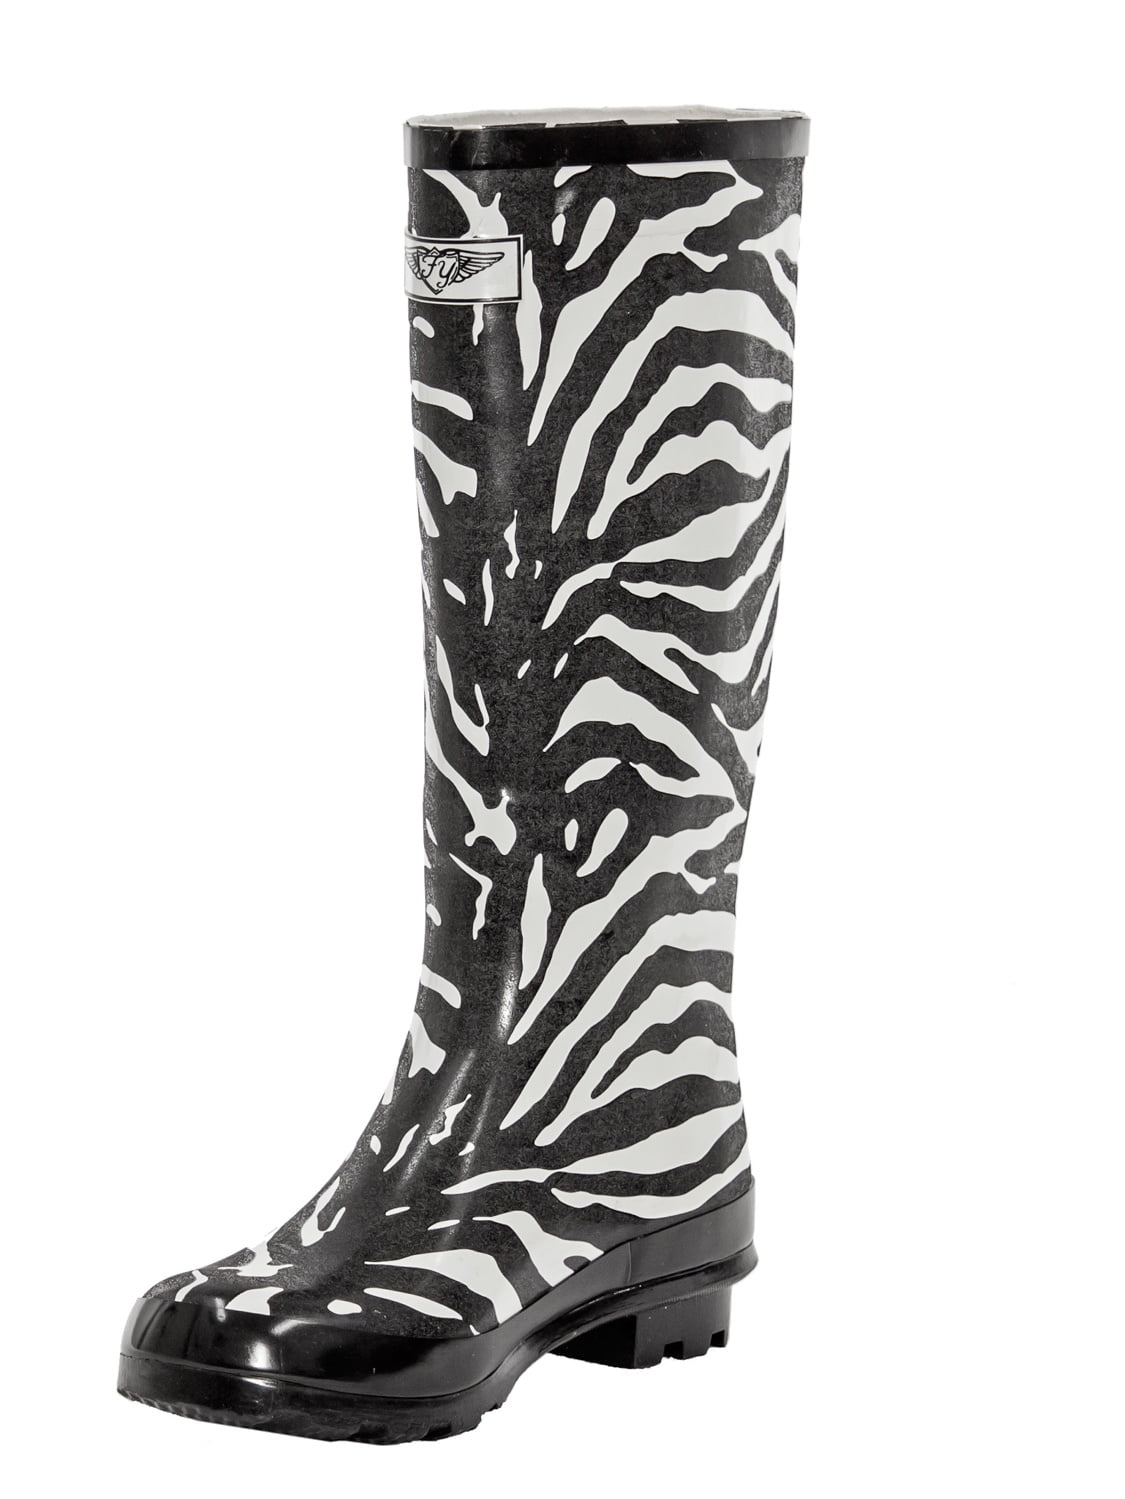 safety vitality Torches Women Rubber Rain Boots with Cotton Lining, Zebra Print - Walmart.com